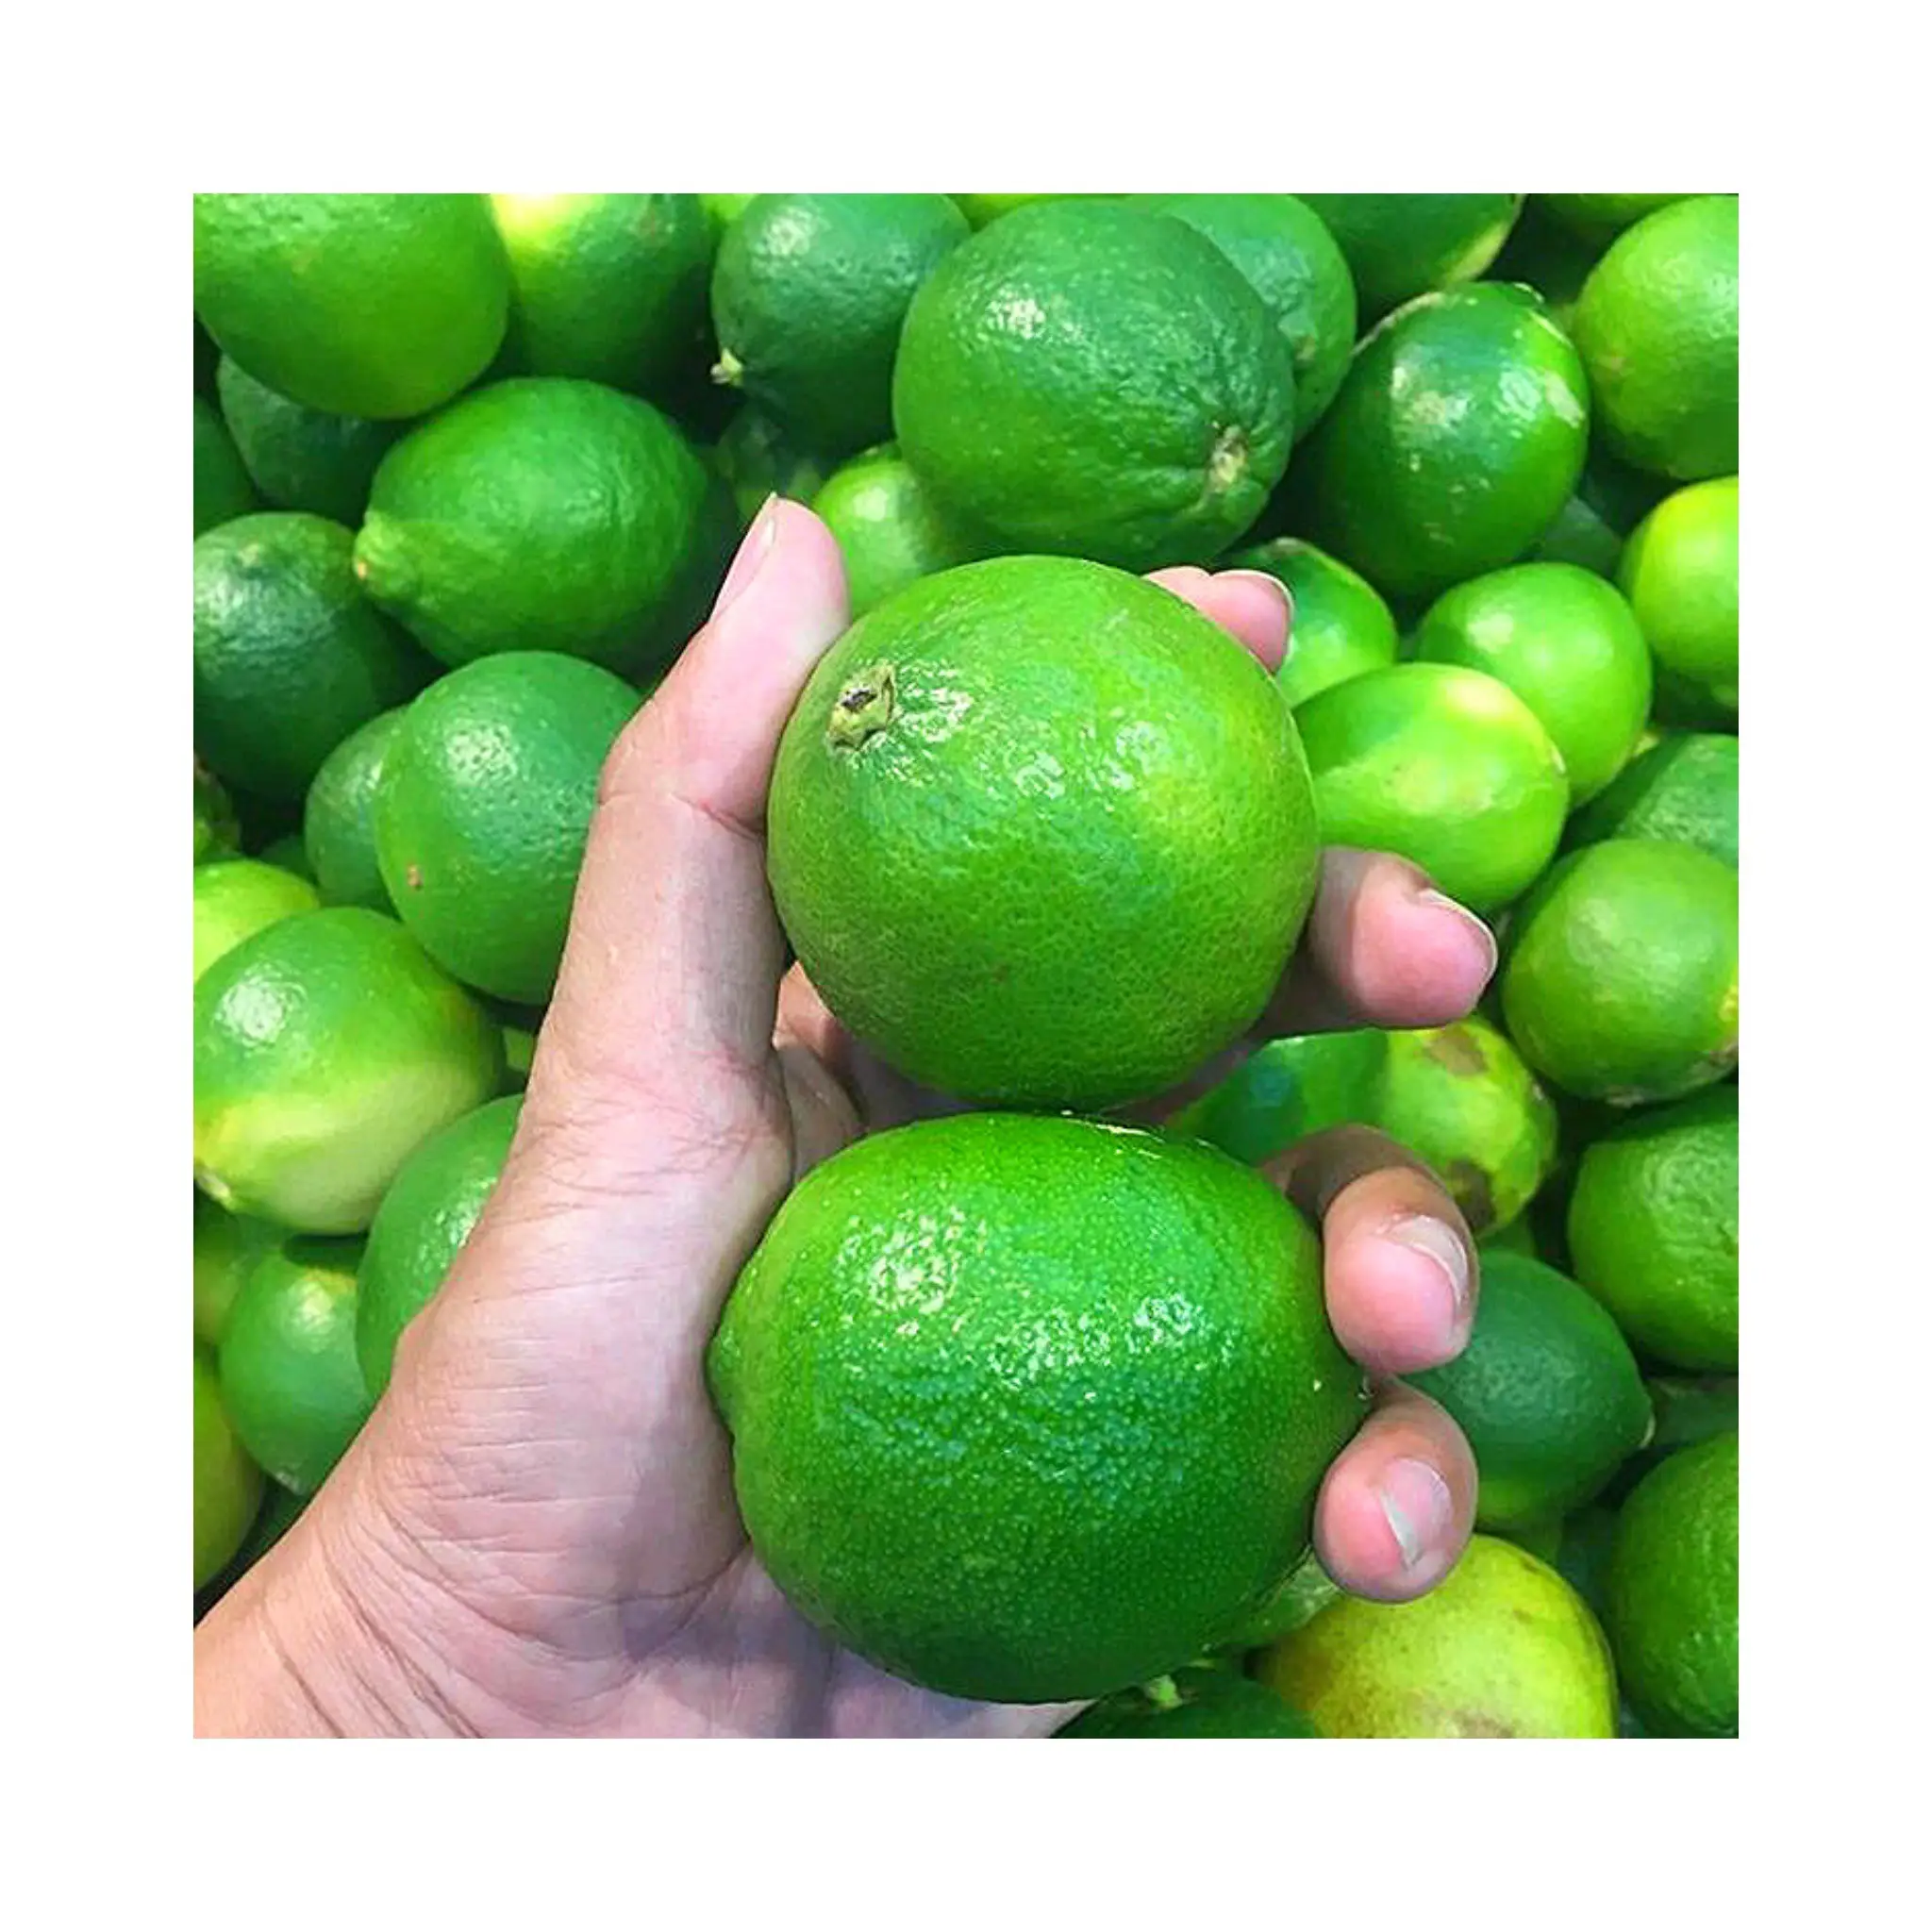 Fruits And Vegetables Fresh Lime Fast Delivery Natural Follow the Customer's Requirement Made in Vietnam Top Supplier 99GD